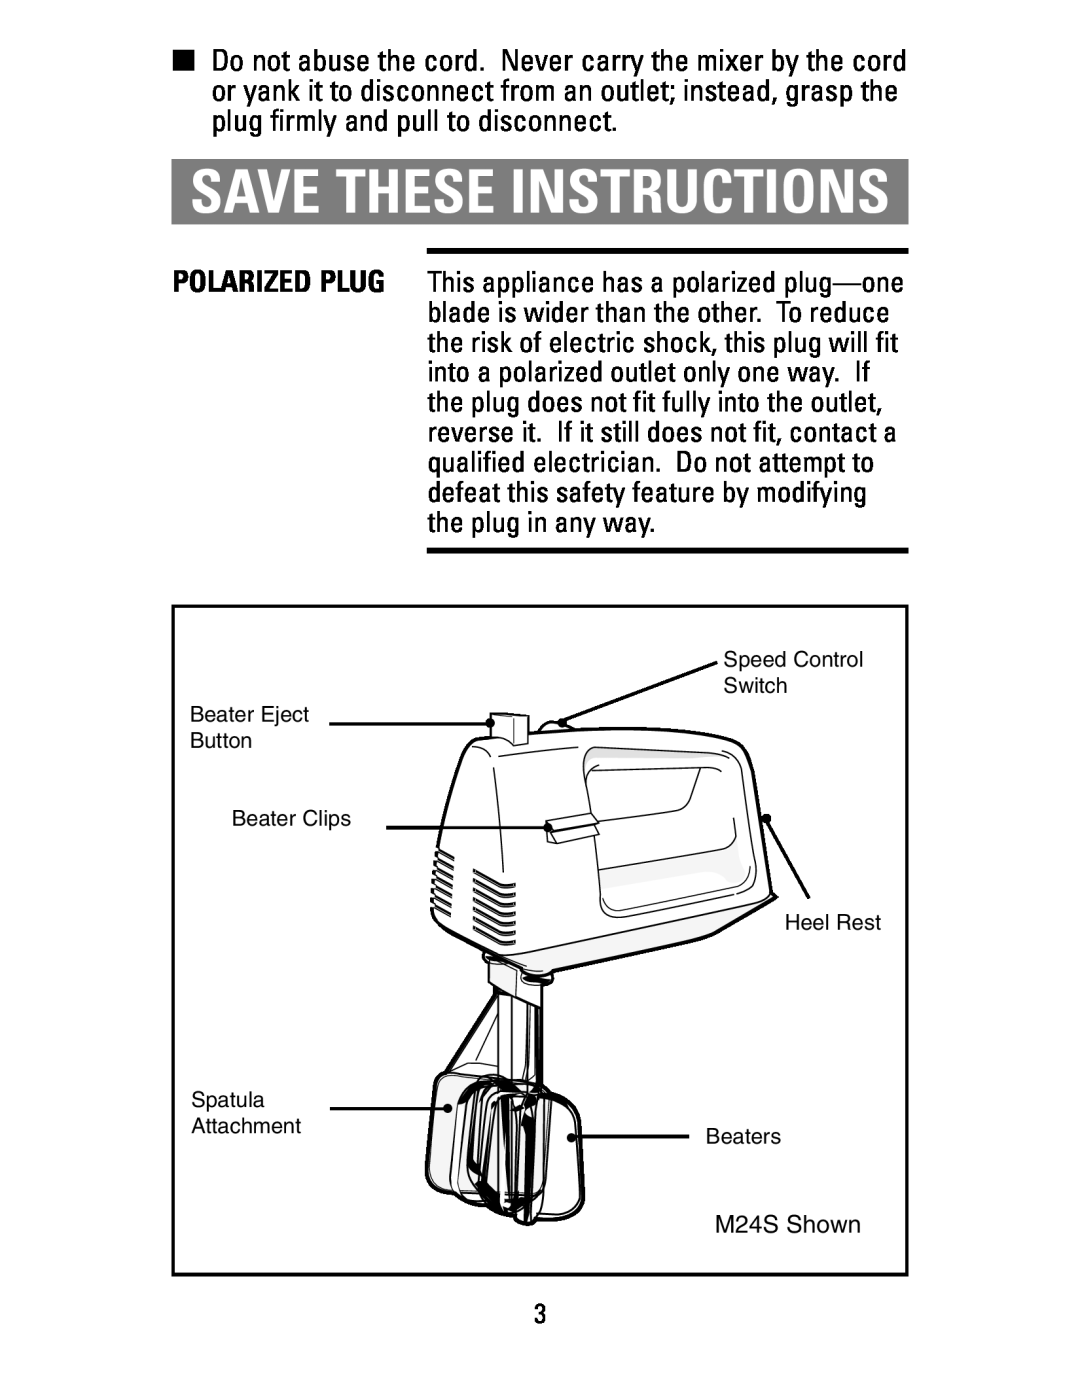 Black & Decker M22S, M24S manual Save These Instructions 